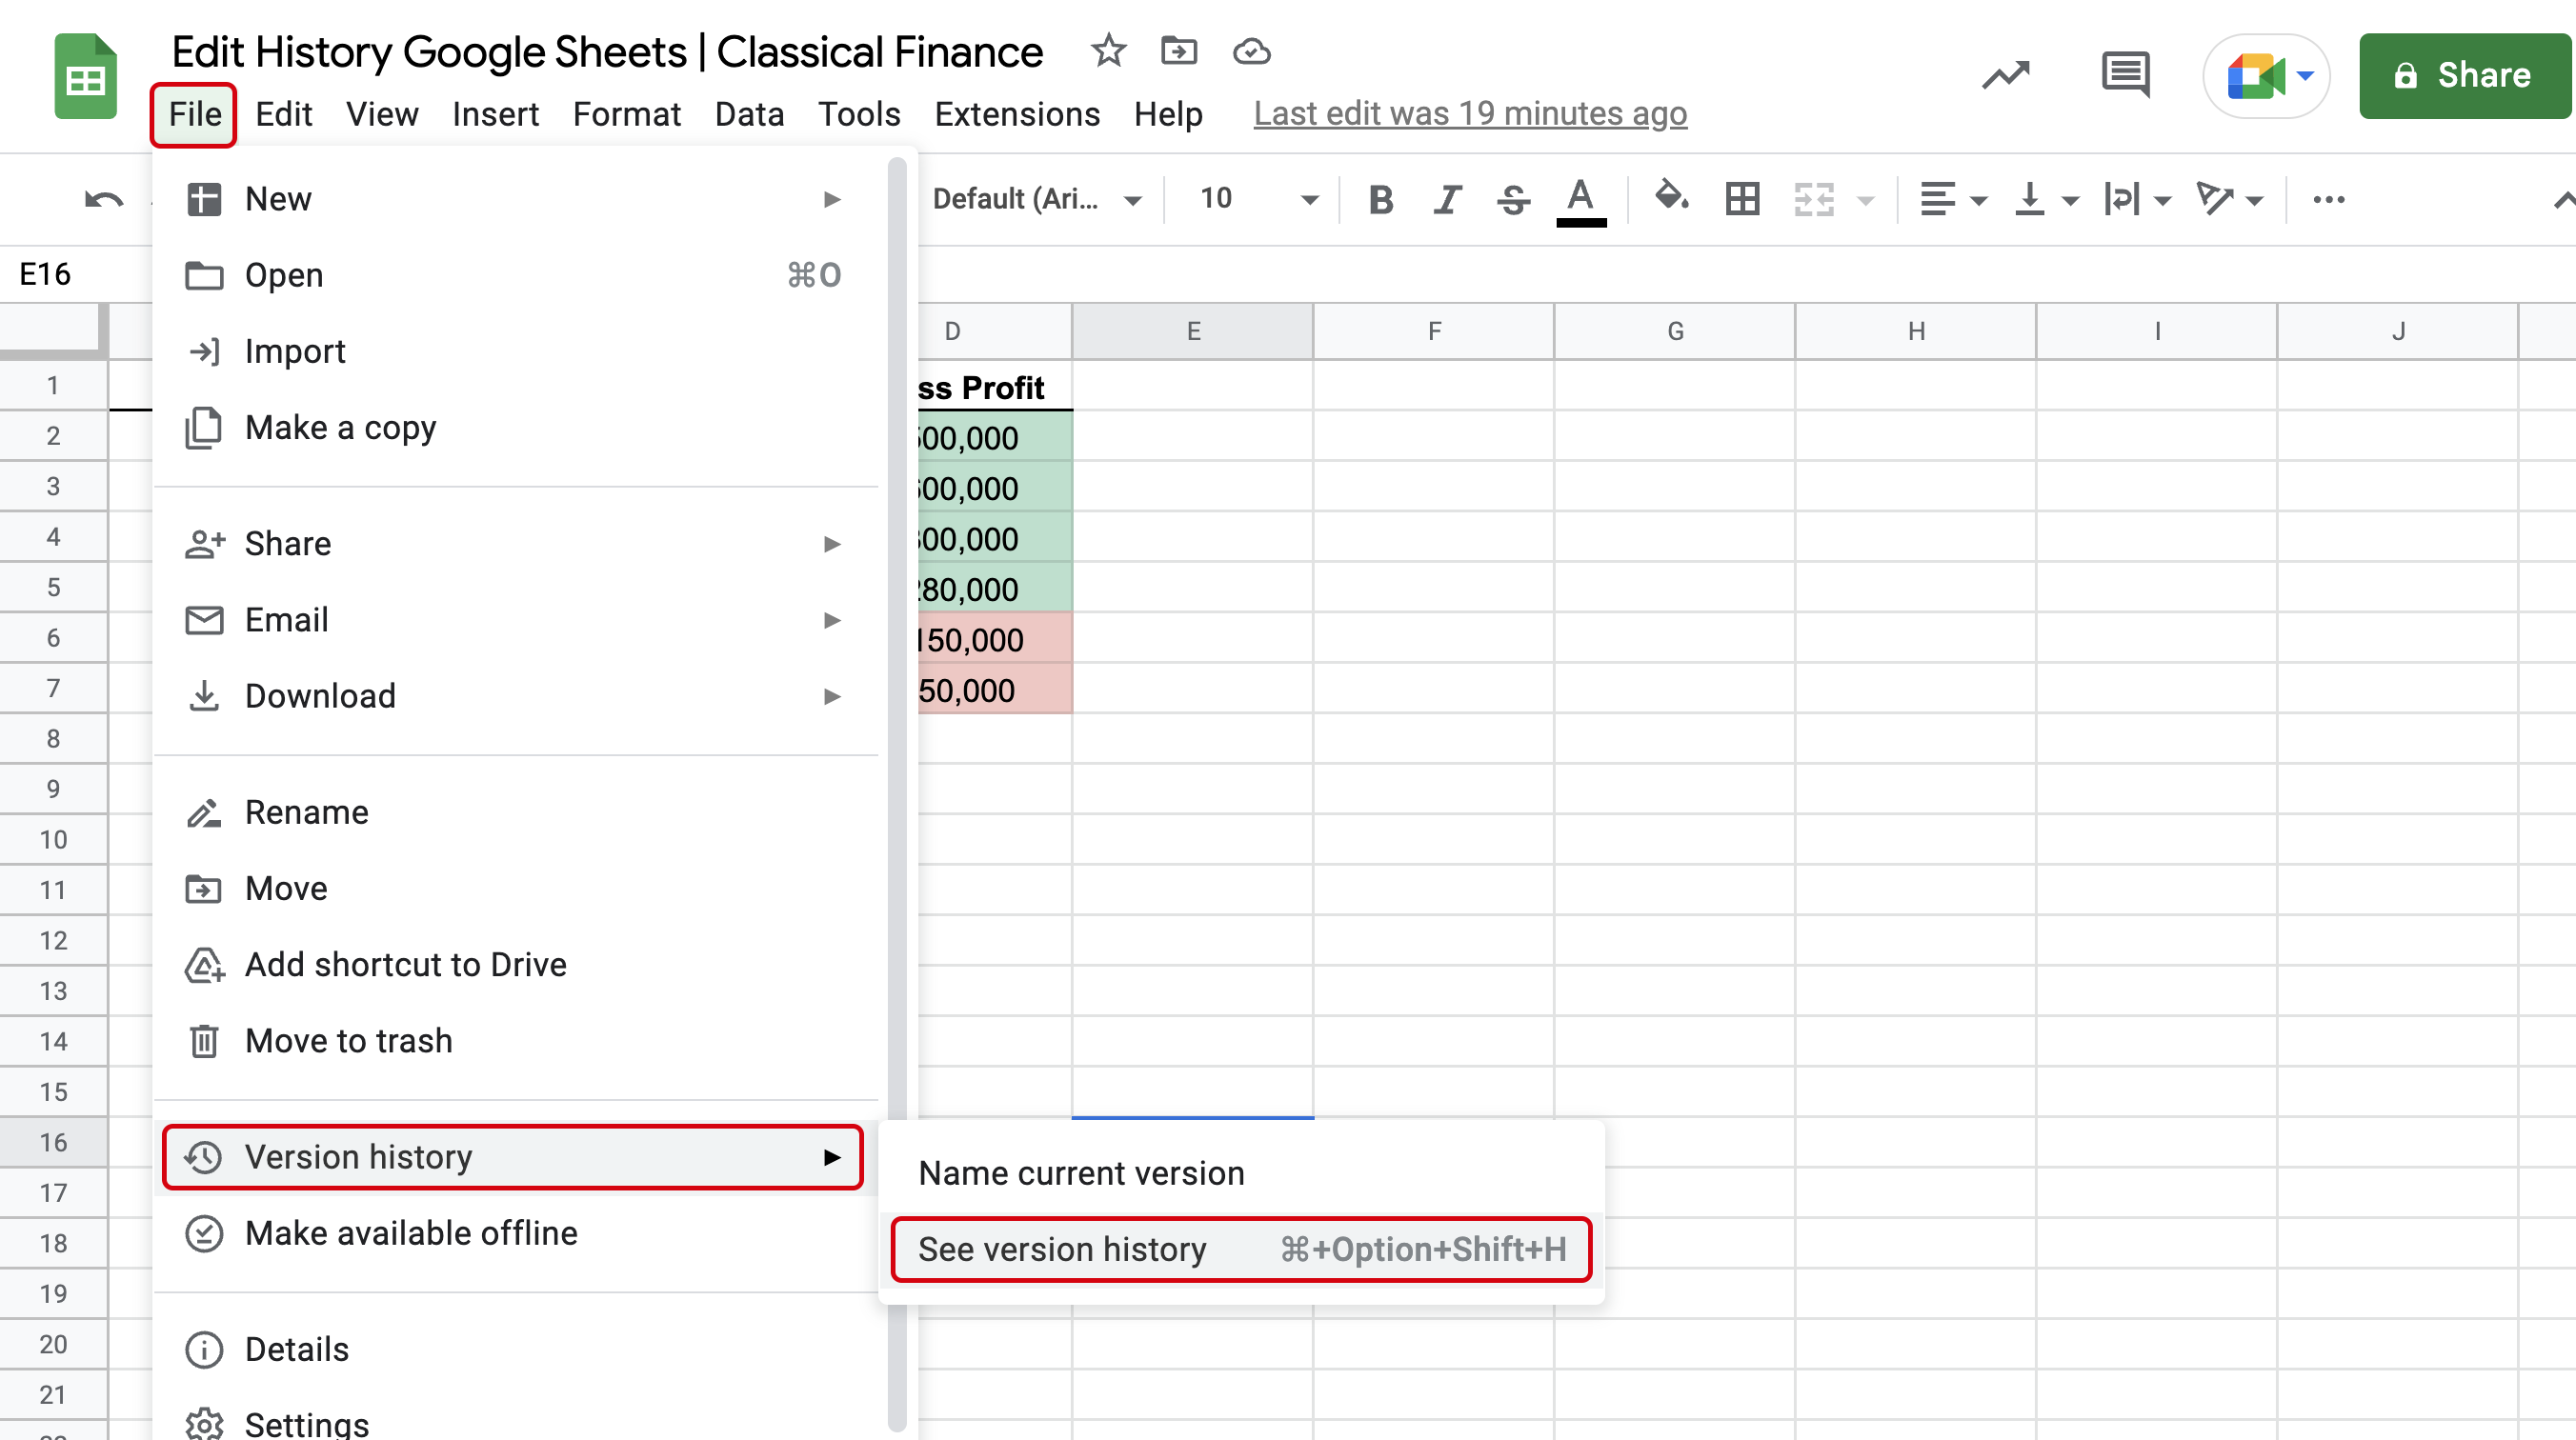 How To Find Edit History Google Sheets